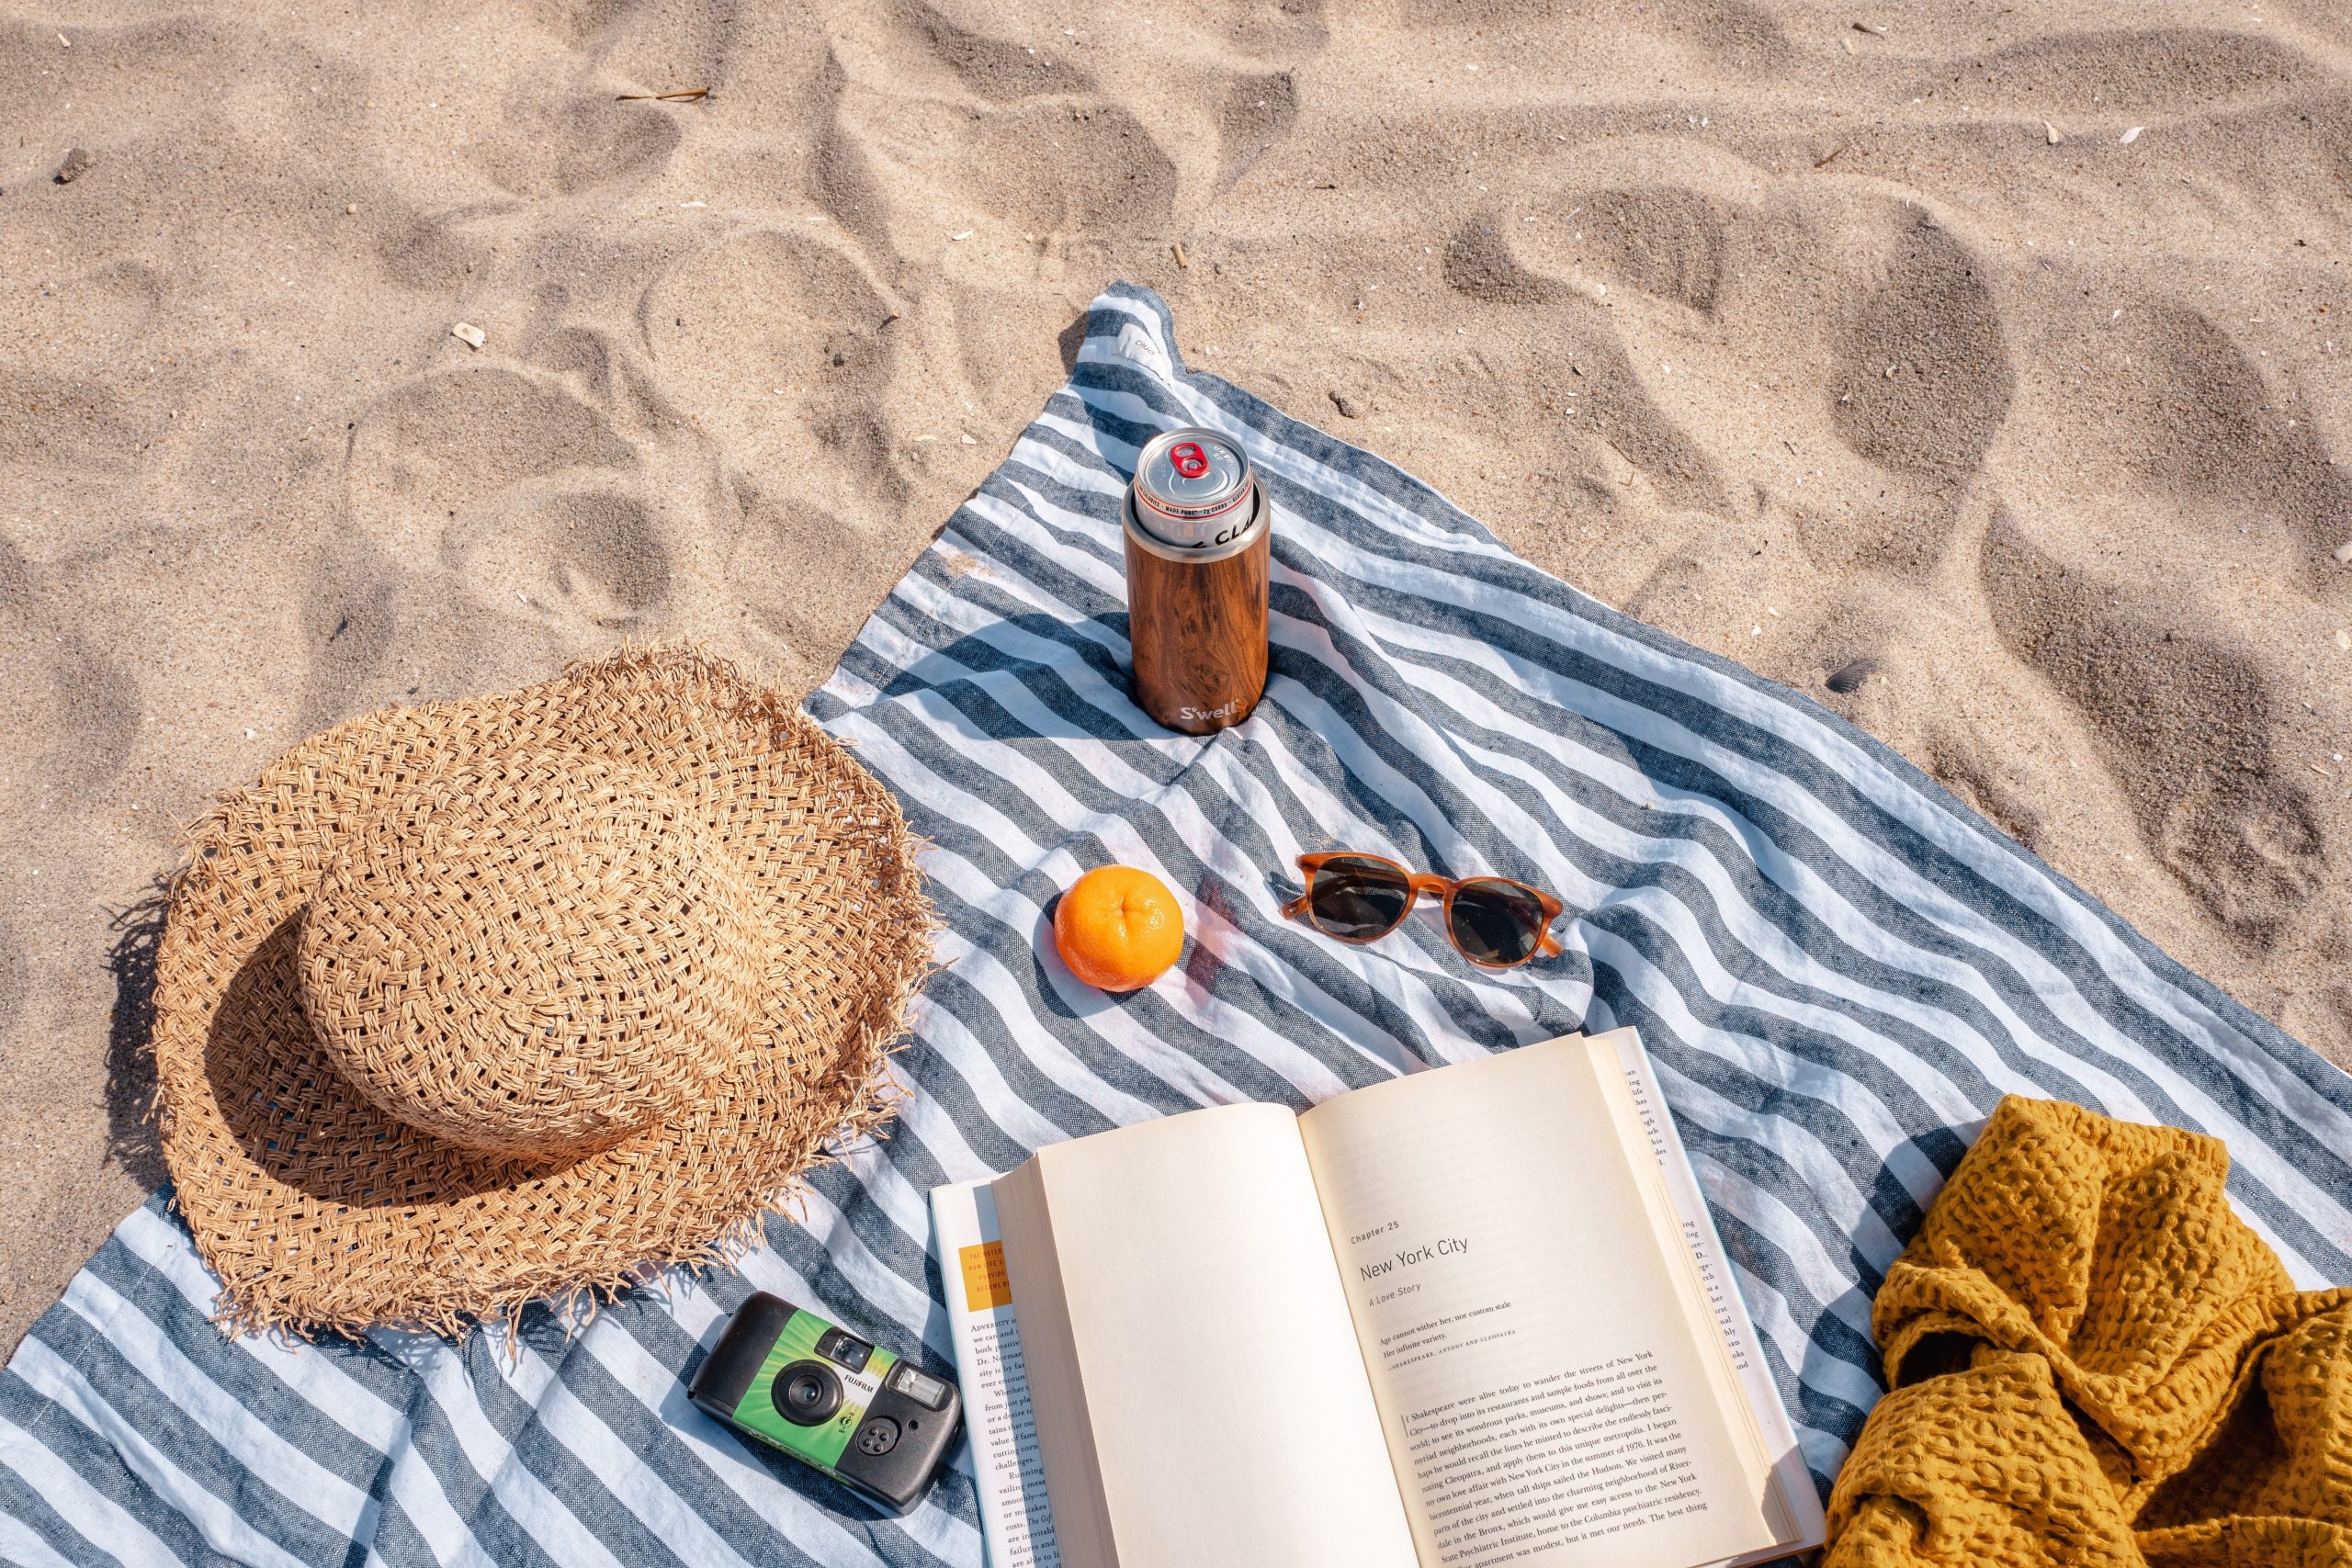 The books in our beach bag this summer